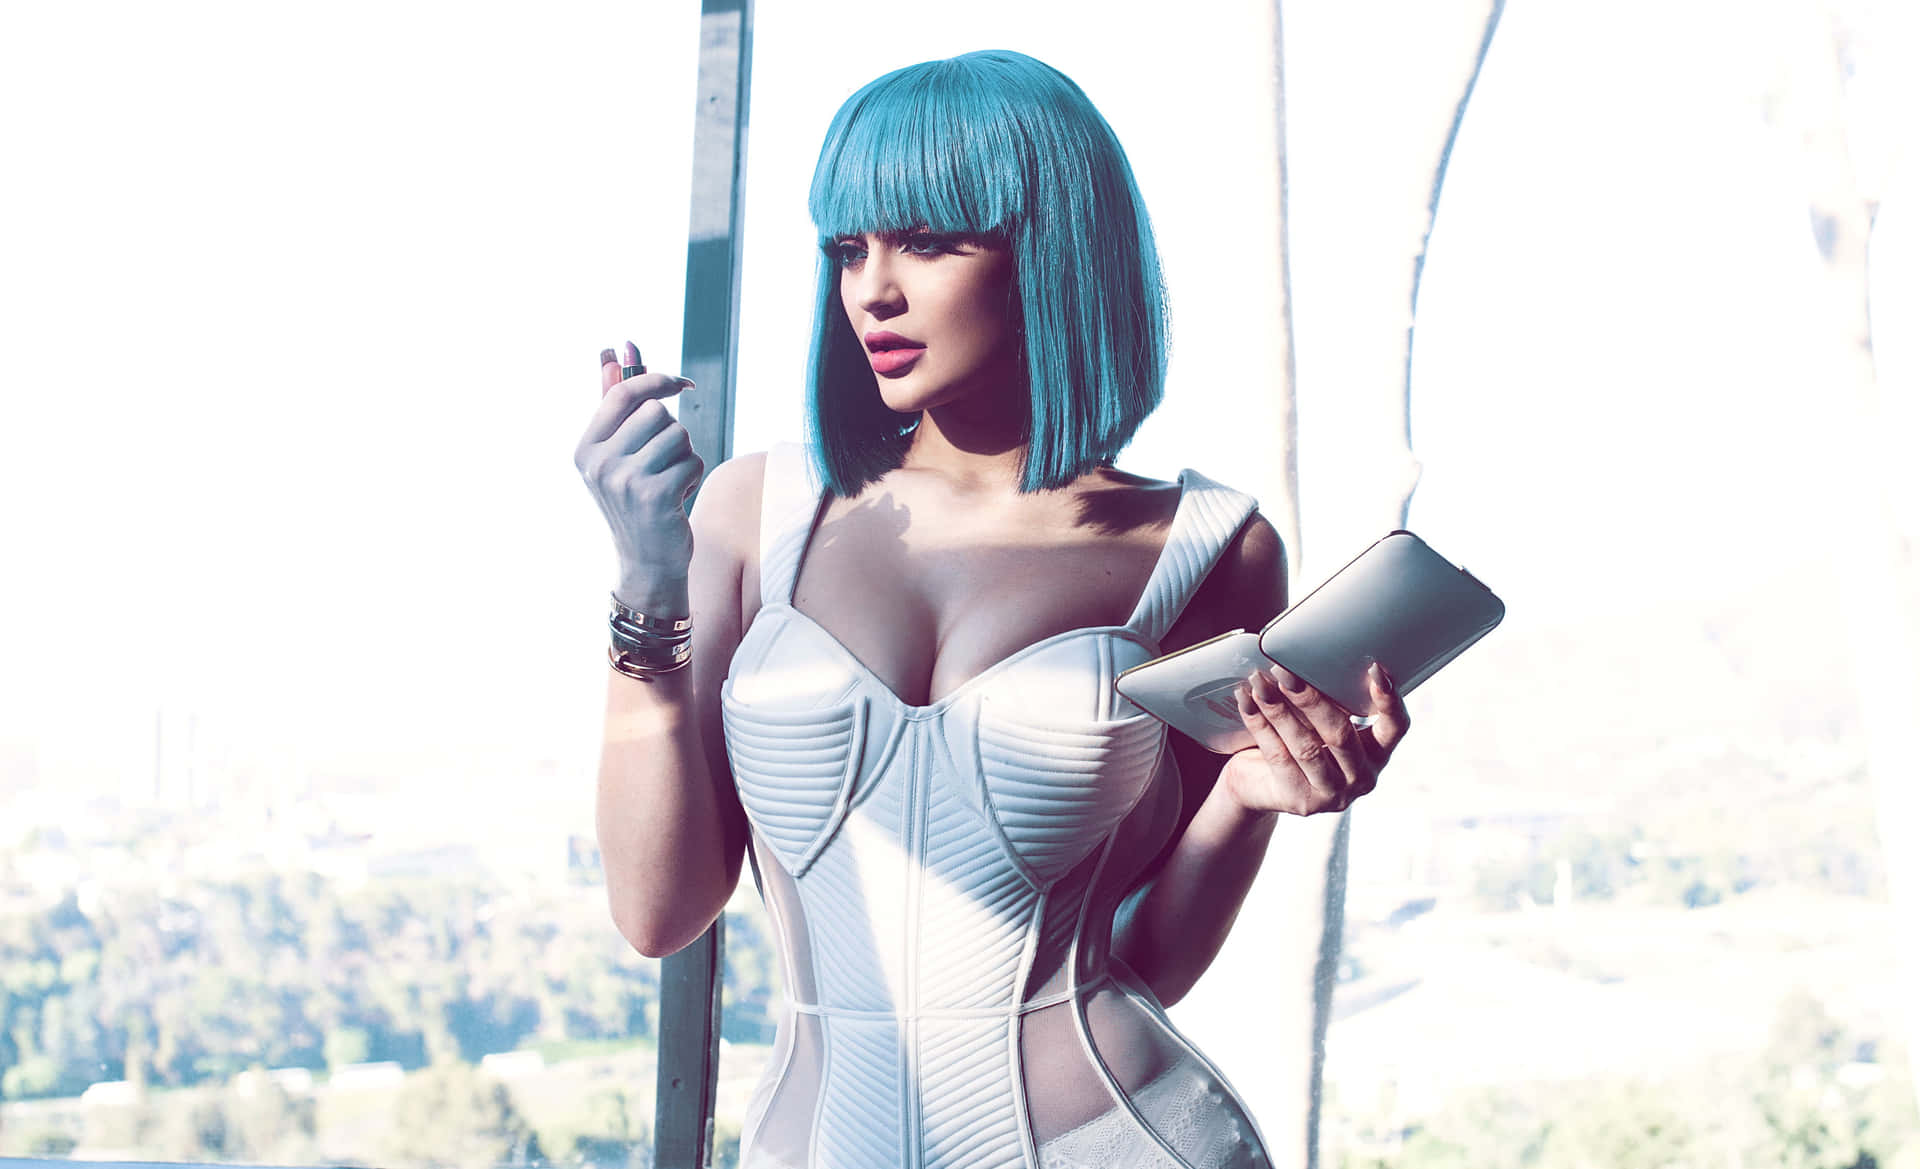 Kylie Jenner radiates beauty and glamour Wallpaper